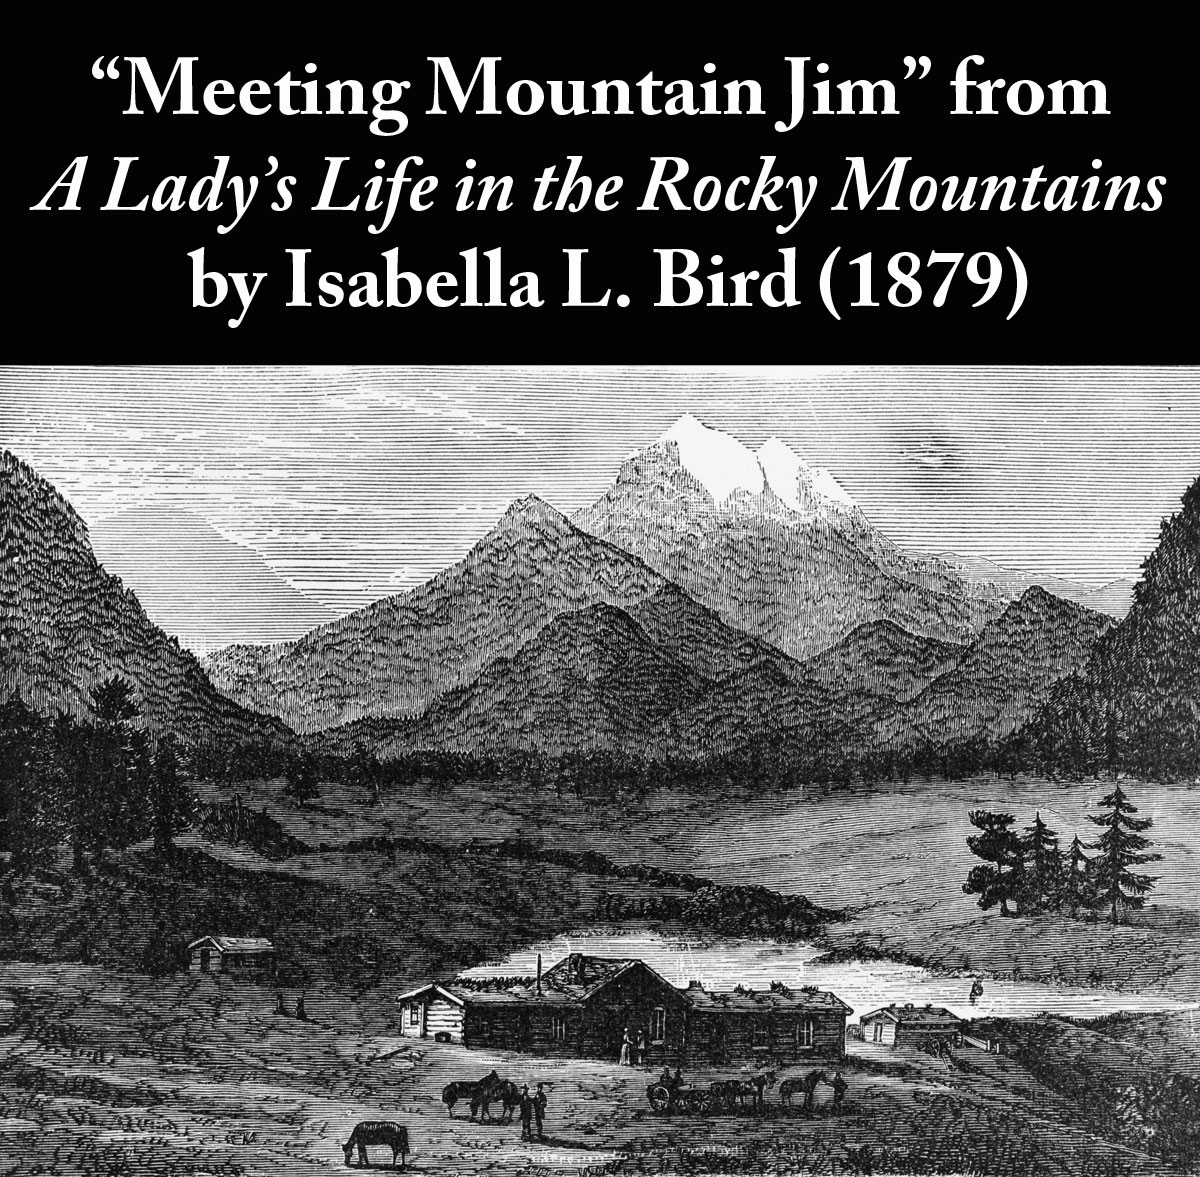 Meeting Mountain Jim from A Lady's Life in the Rocky Mountains by Isabella L. Bird (1879)